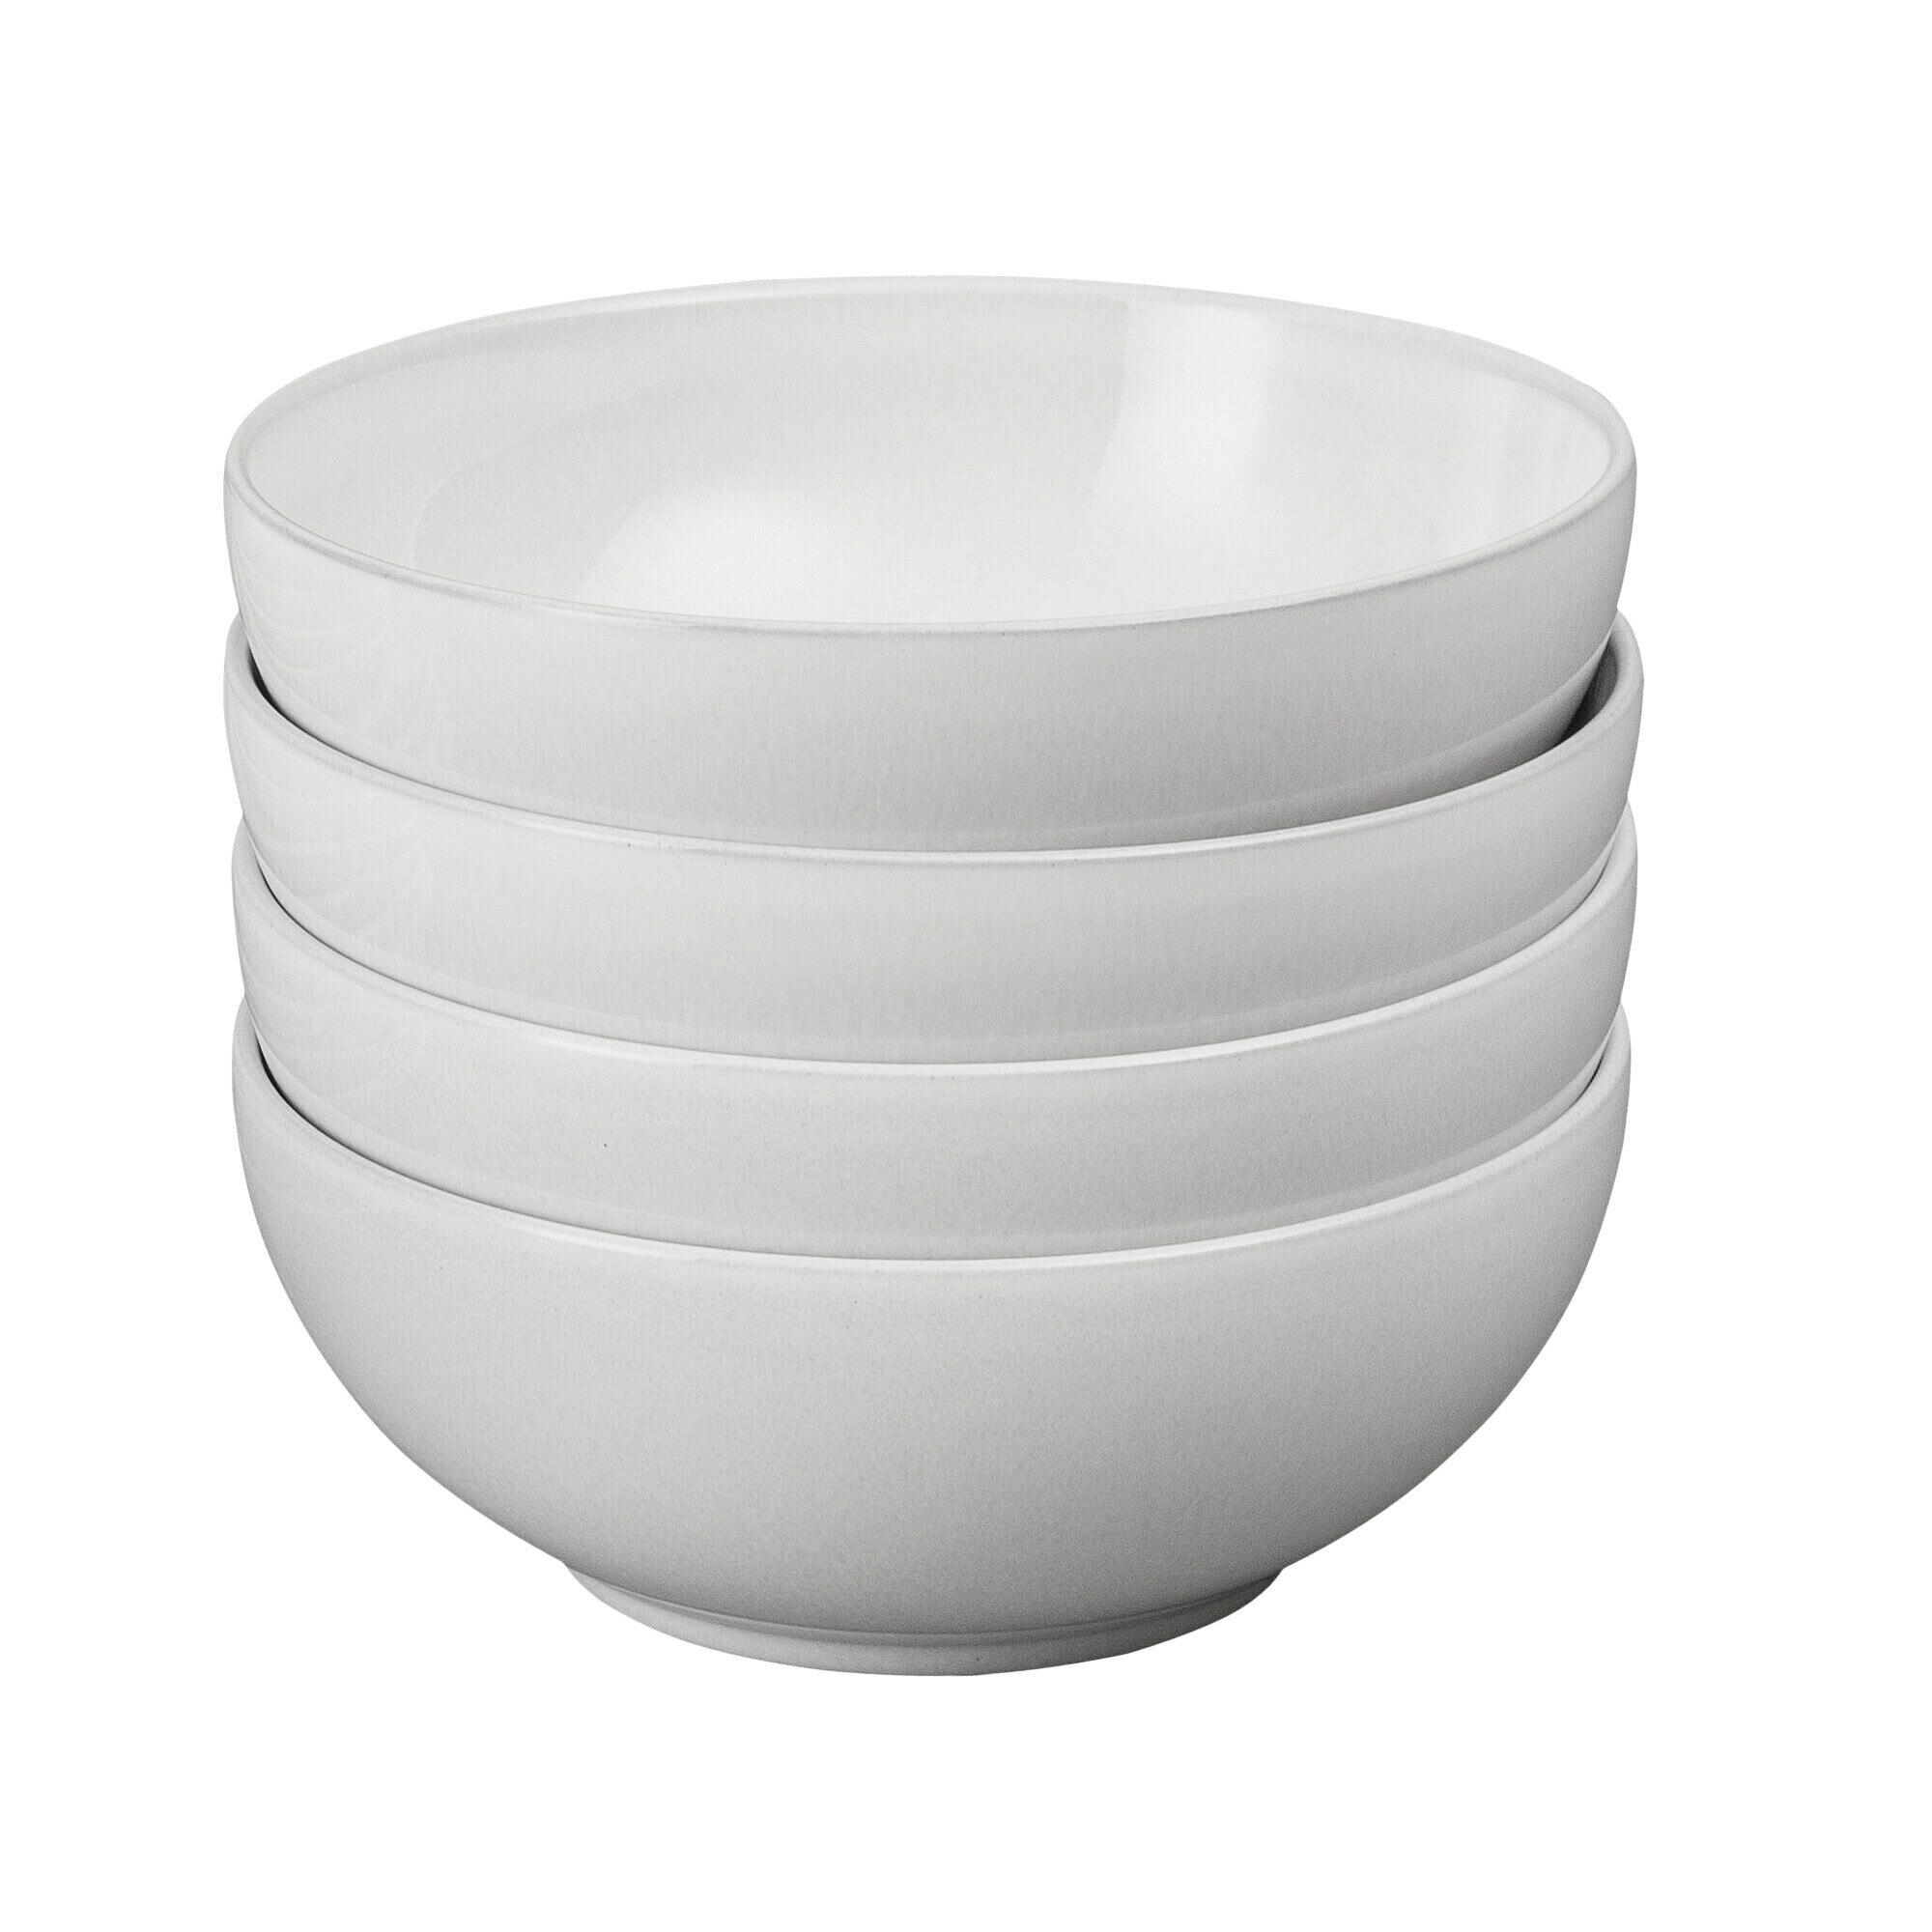 Elements Stone White Set Of 4 Coupe Cereal Bowls